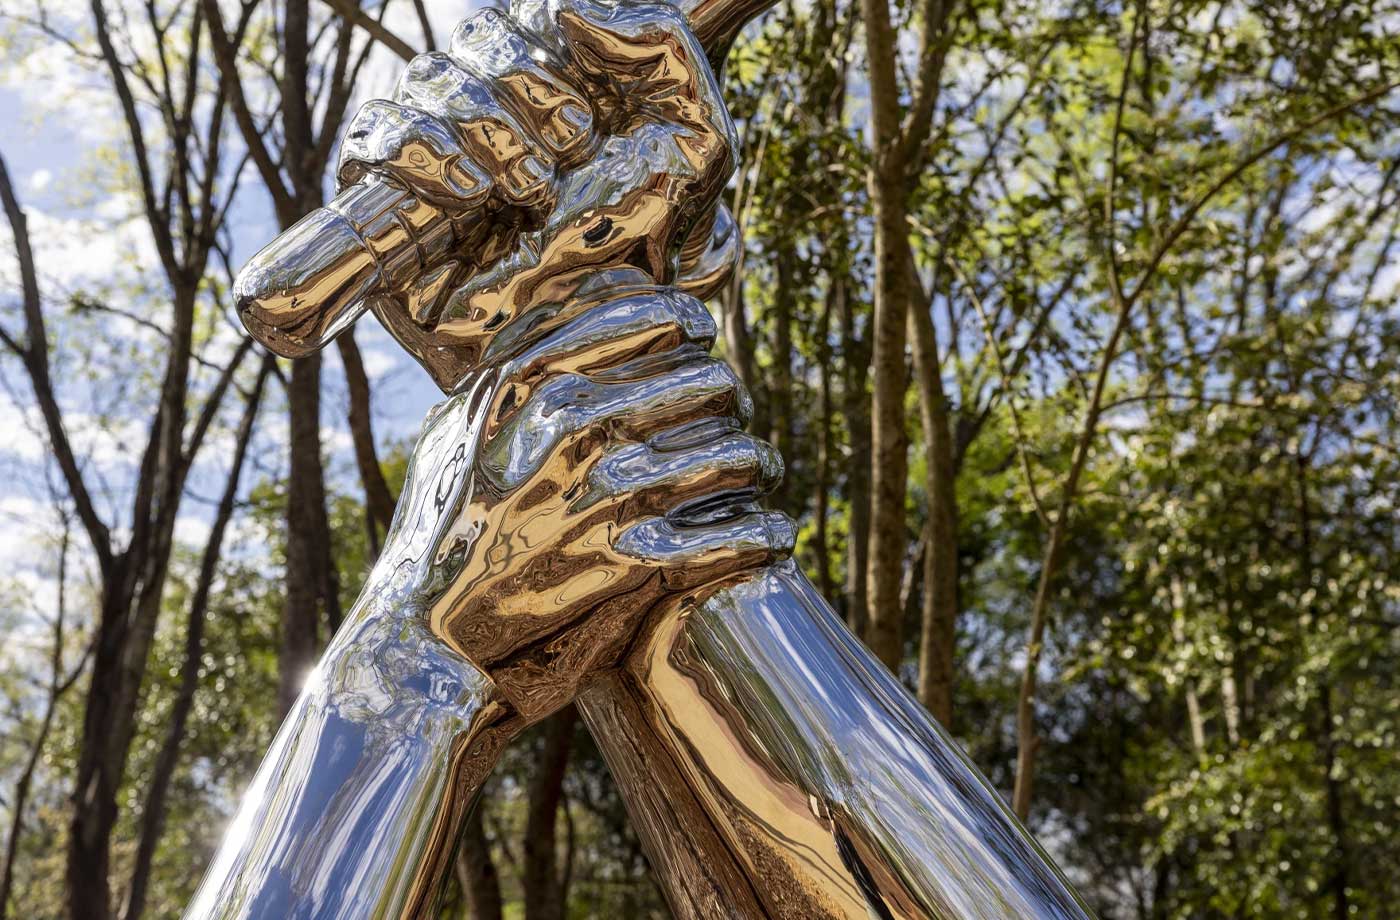 Equal Justice Initiative Opens New Sculpture Park Focused on Slavery